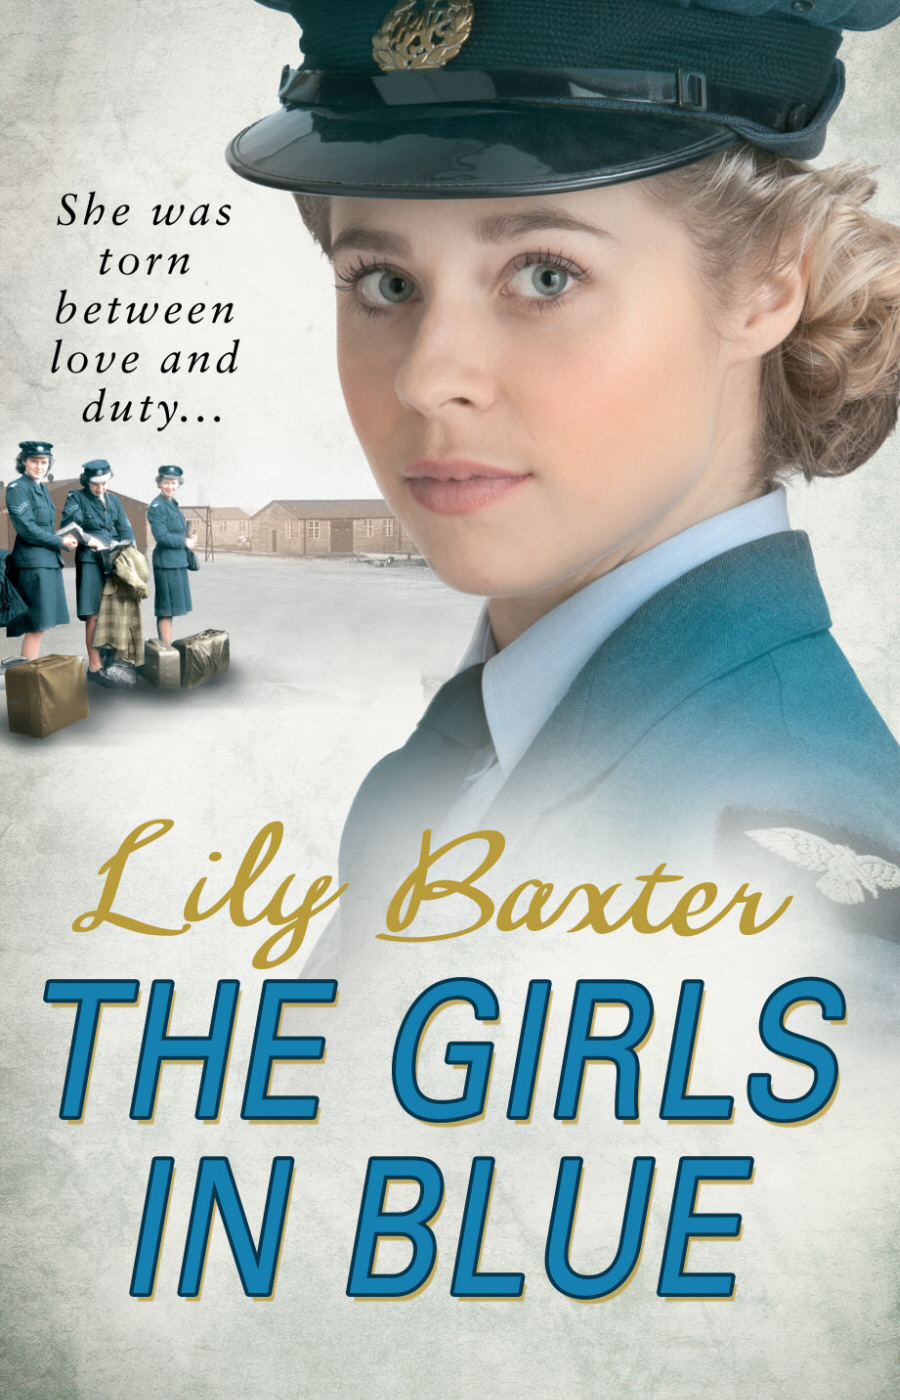 The Girls in Blue by Lily Baxter